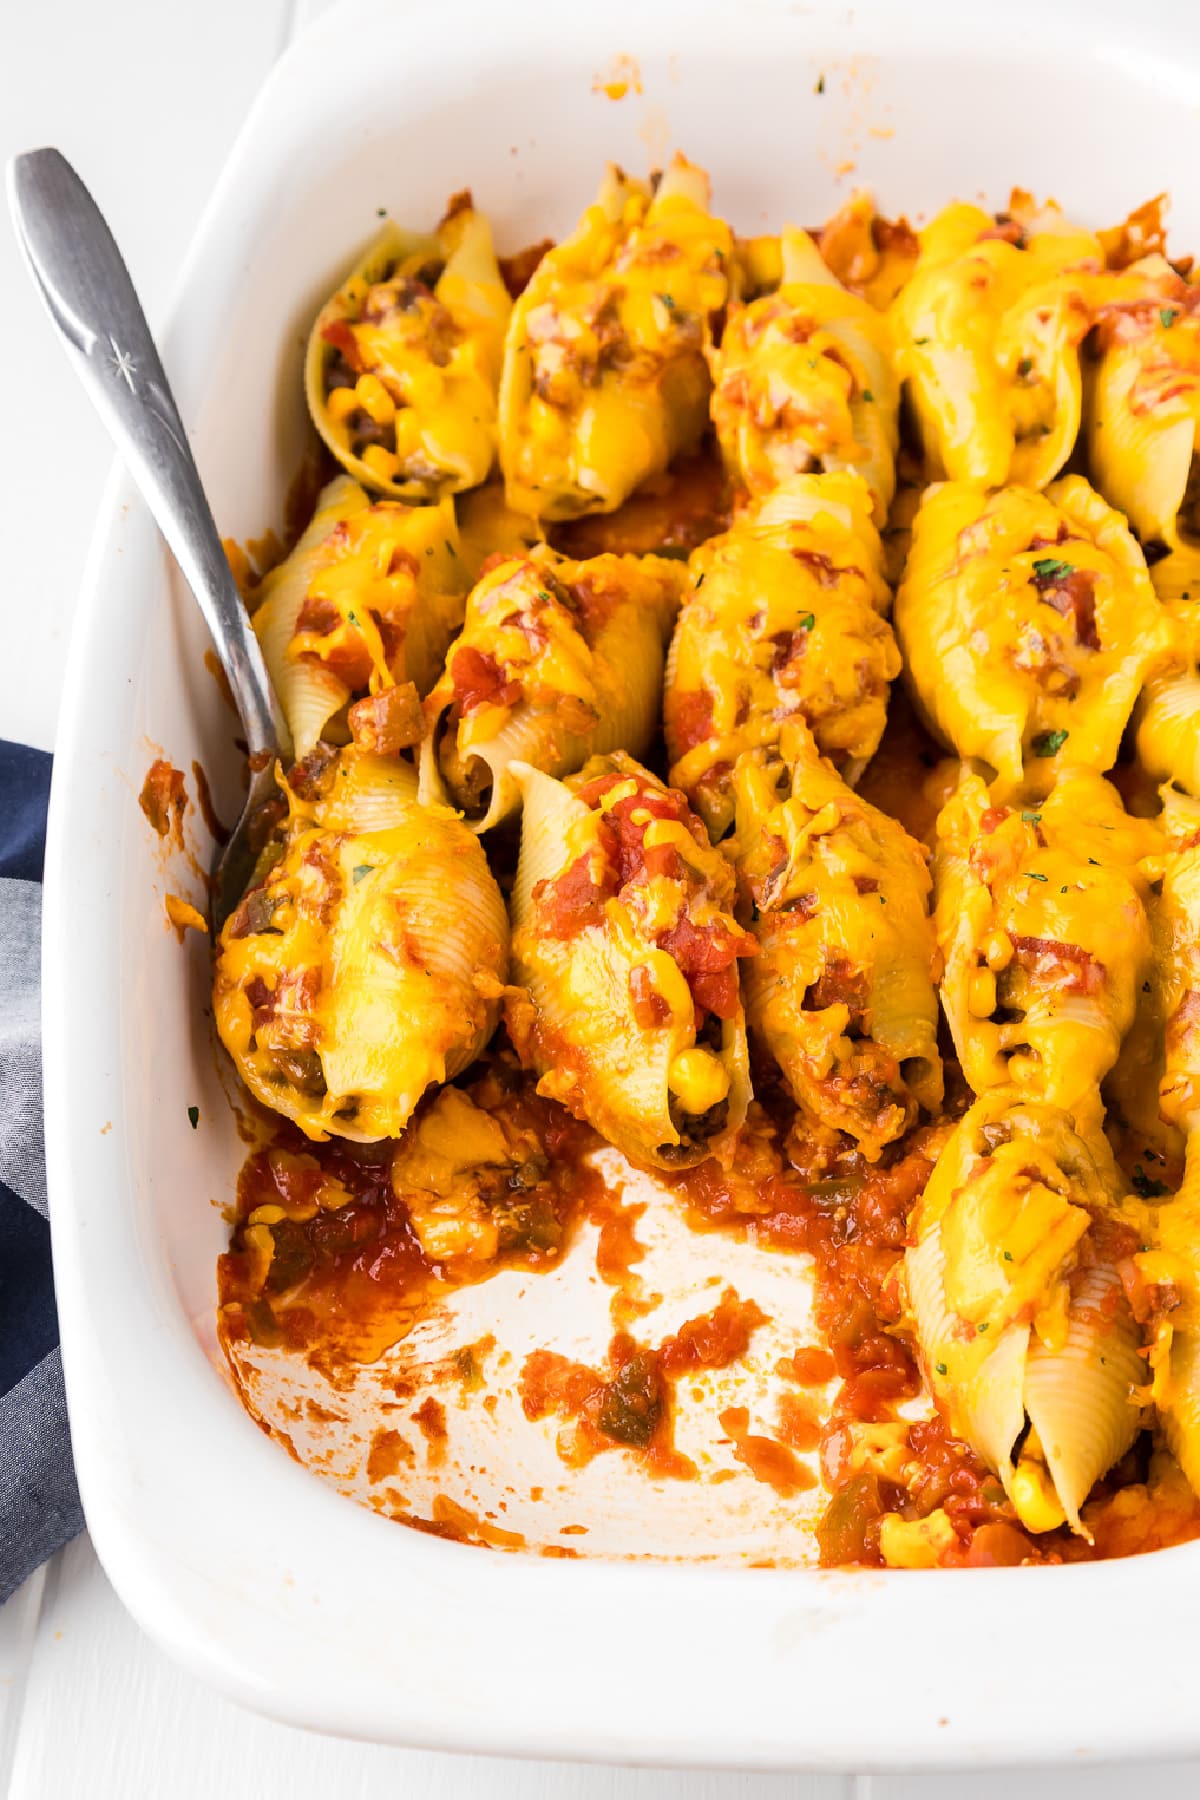 Mexican stuffed shells in a baking dish being scooped by a spoon with a few shells missing from the pan.